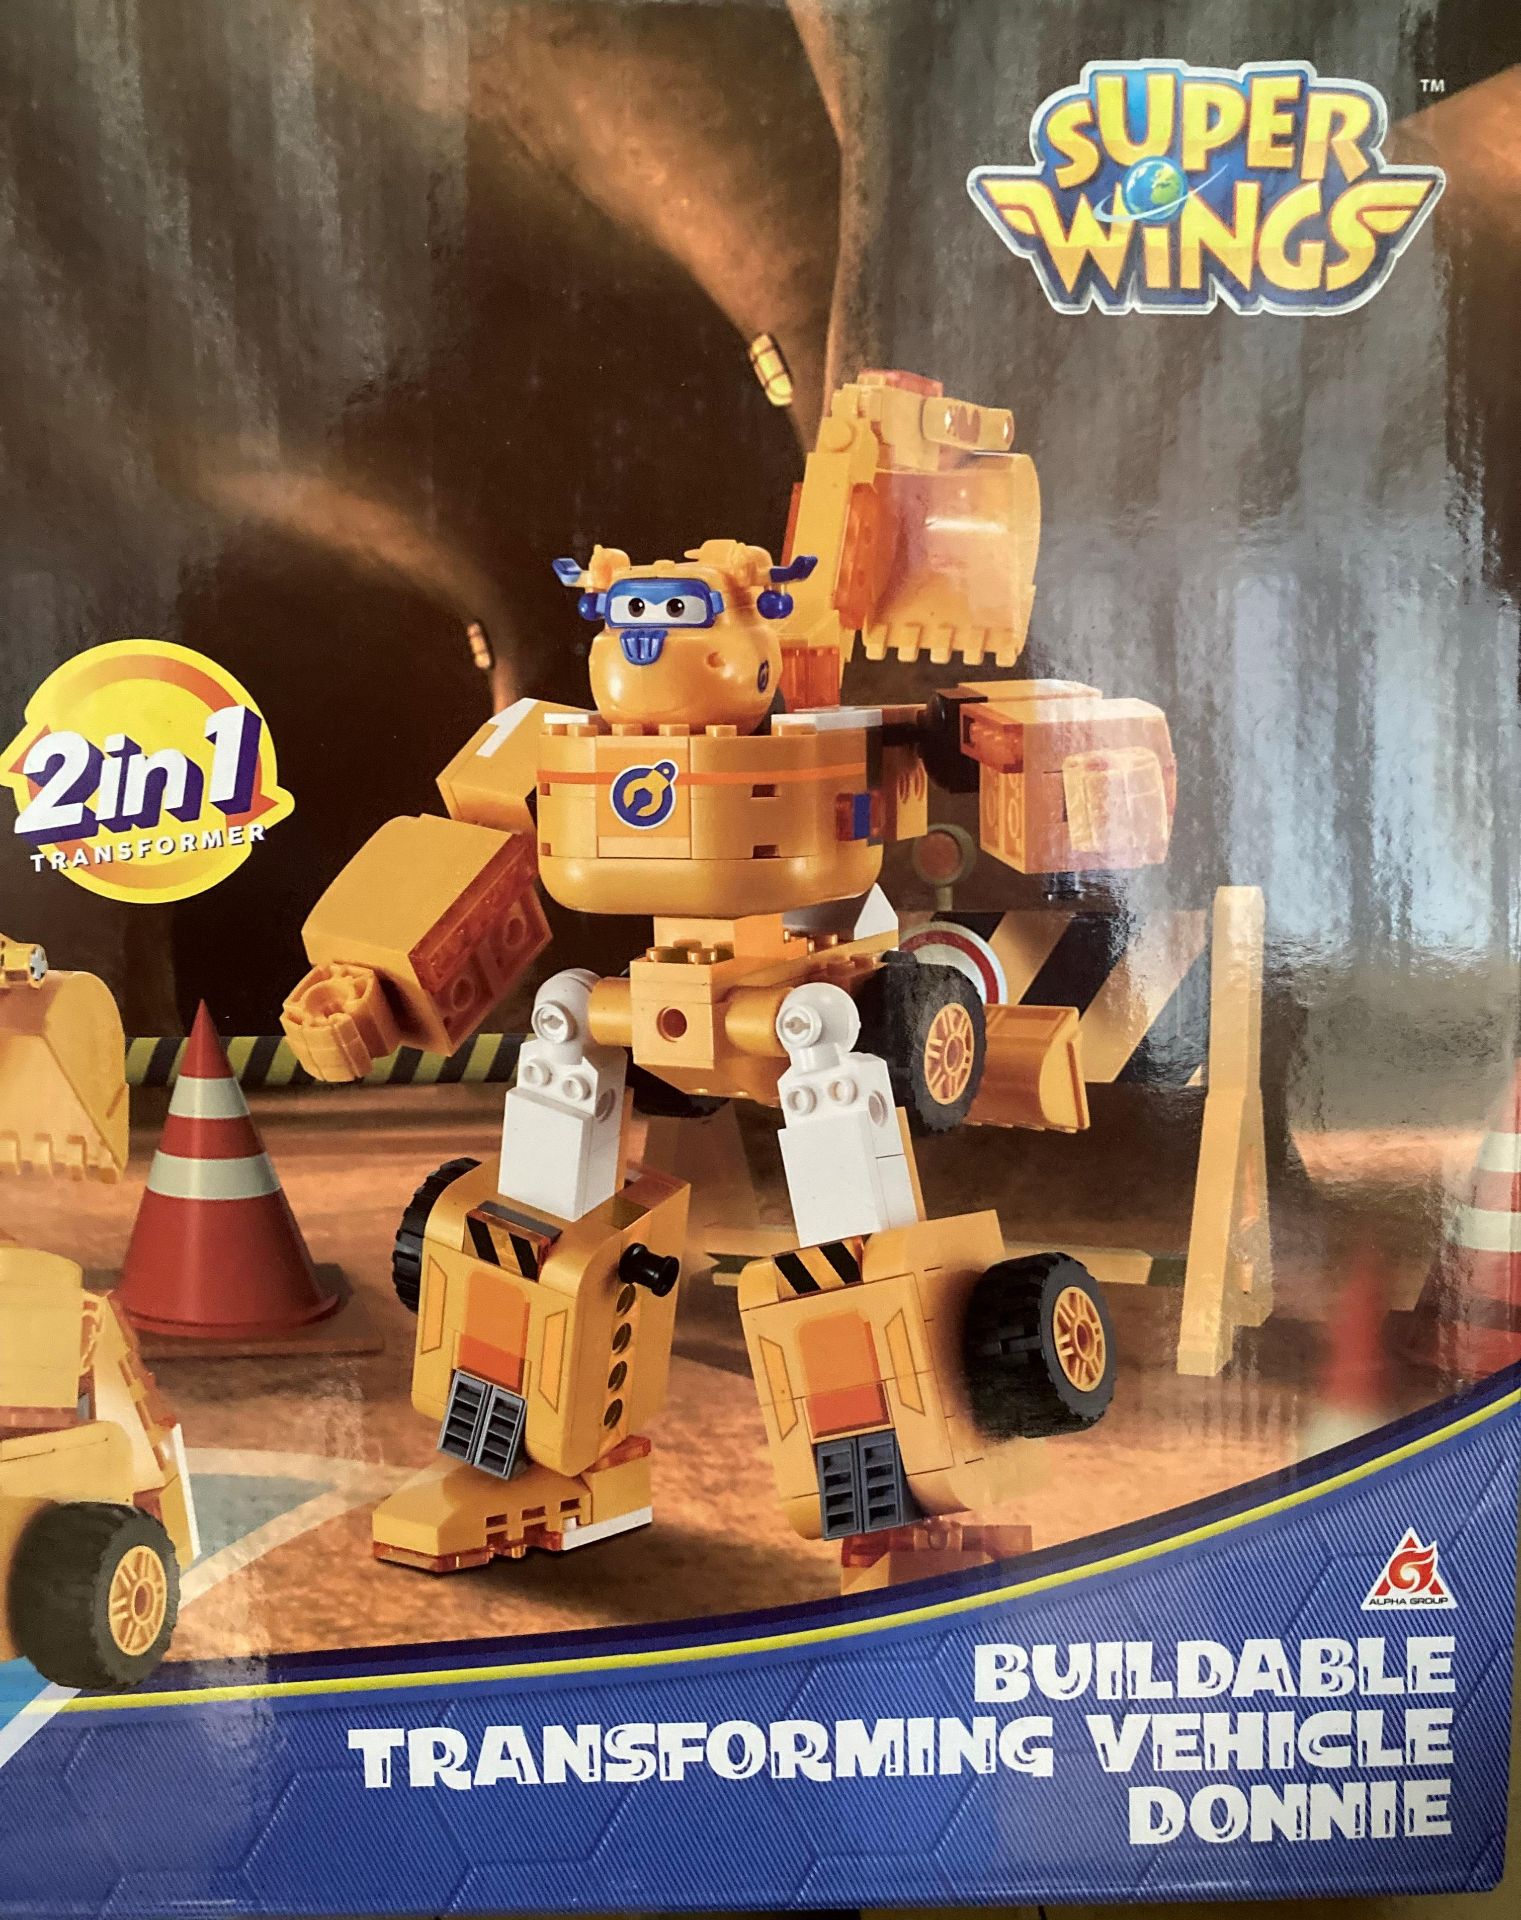 9 x Super Wings Buildable Transforming Vehicle Donnie Wise Block kits (saleroom location: sport - Image 2 of 3